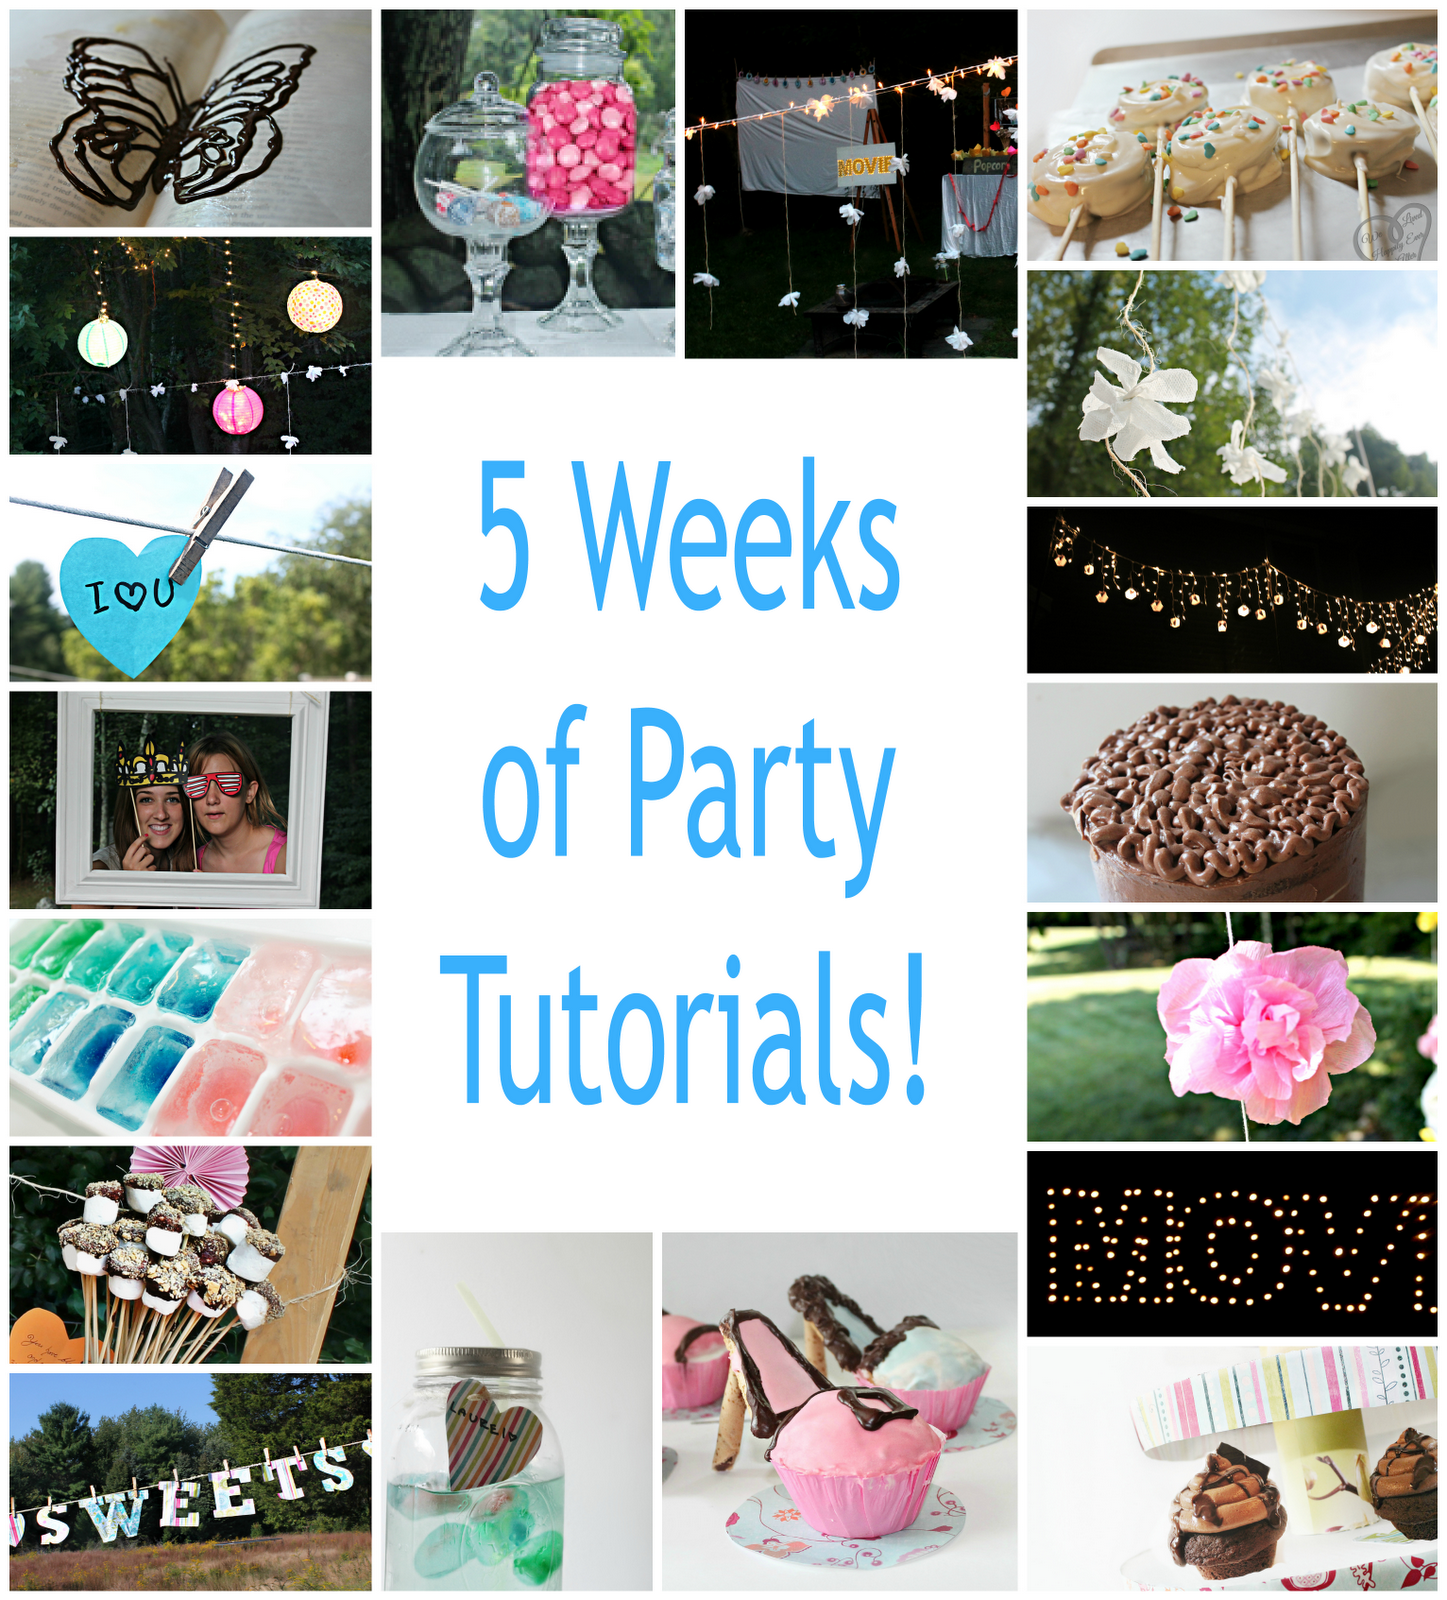 We Lived Happily Ever After5 Weeks of Party DIY & Tutorials!!! | We ...